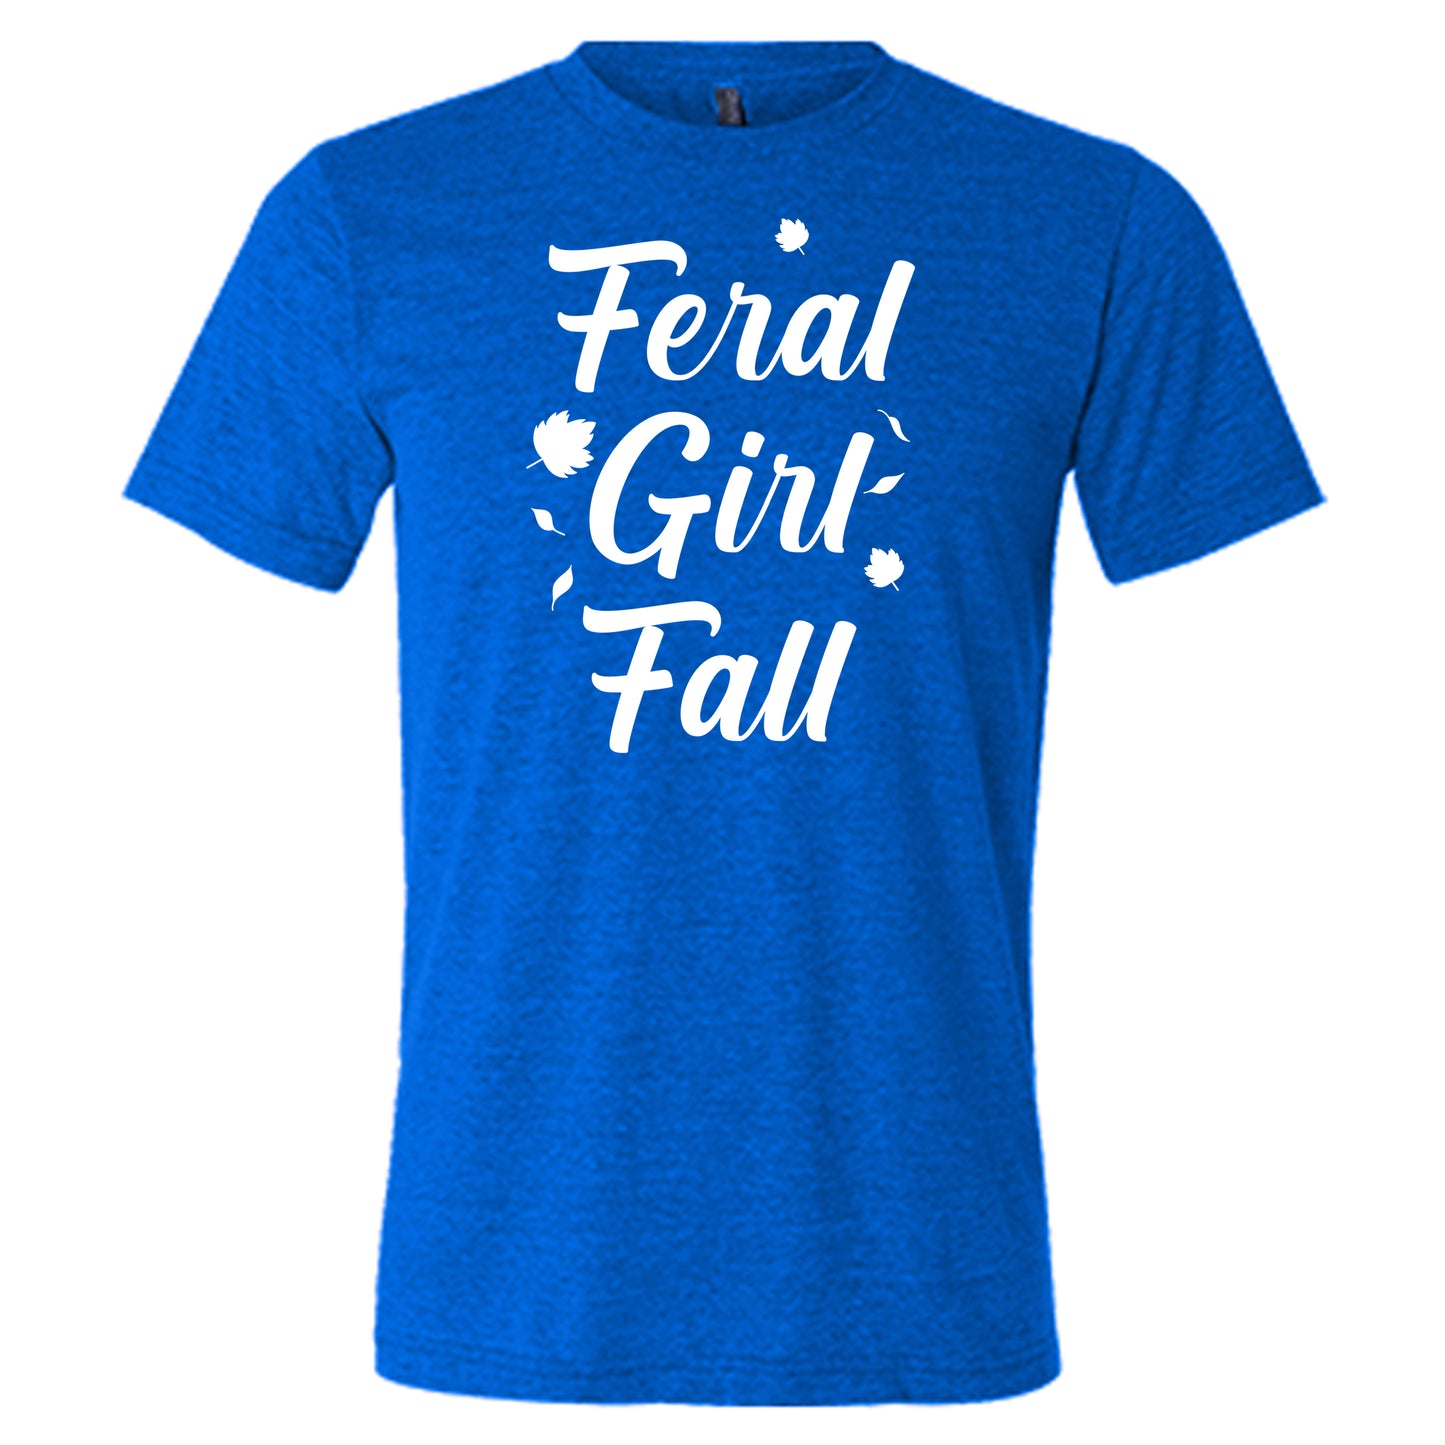 white quote "Feral Girl Fall" on a blue shirt